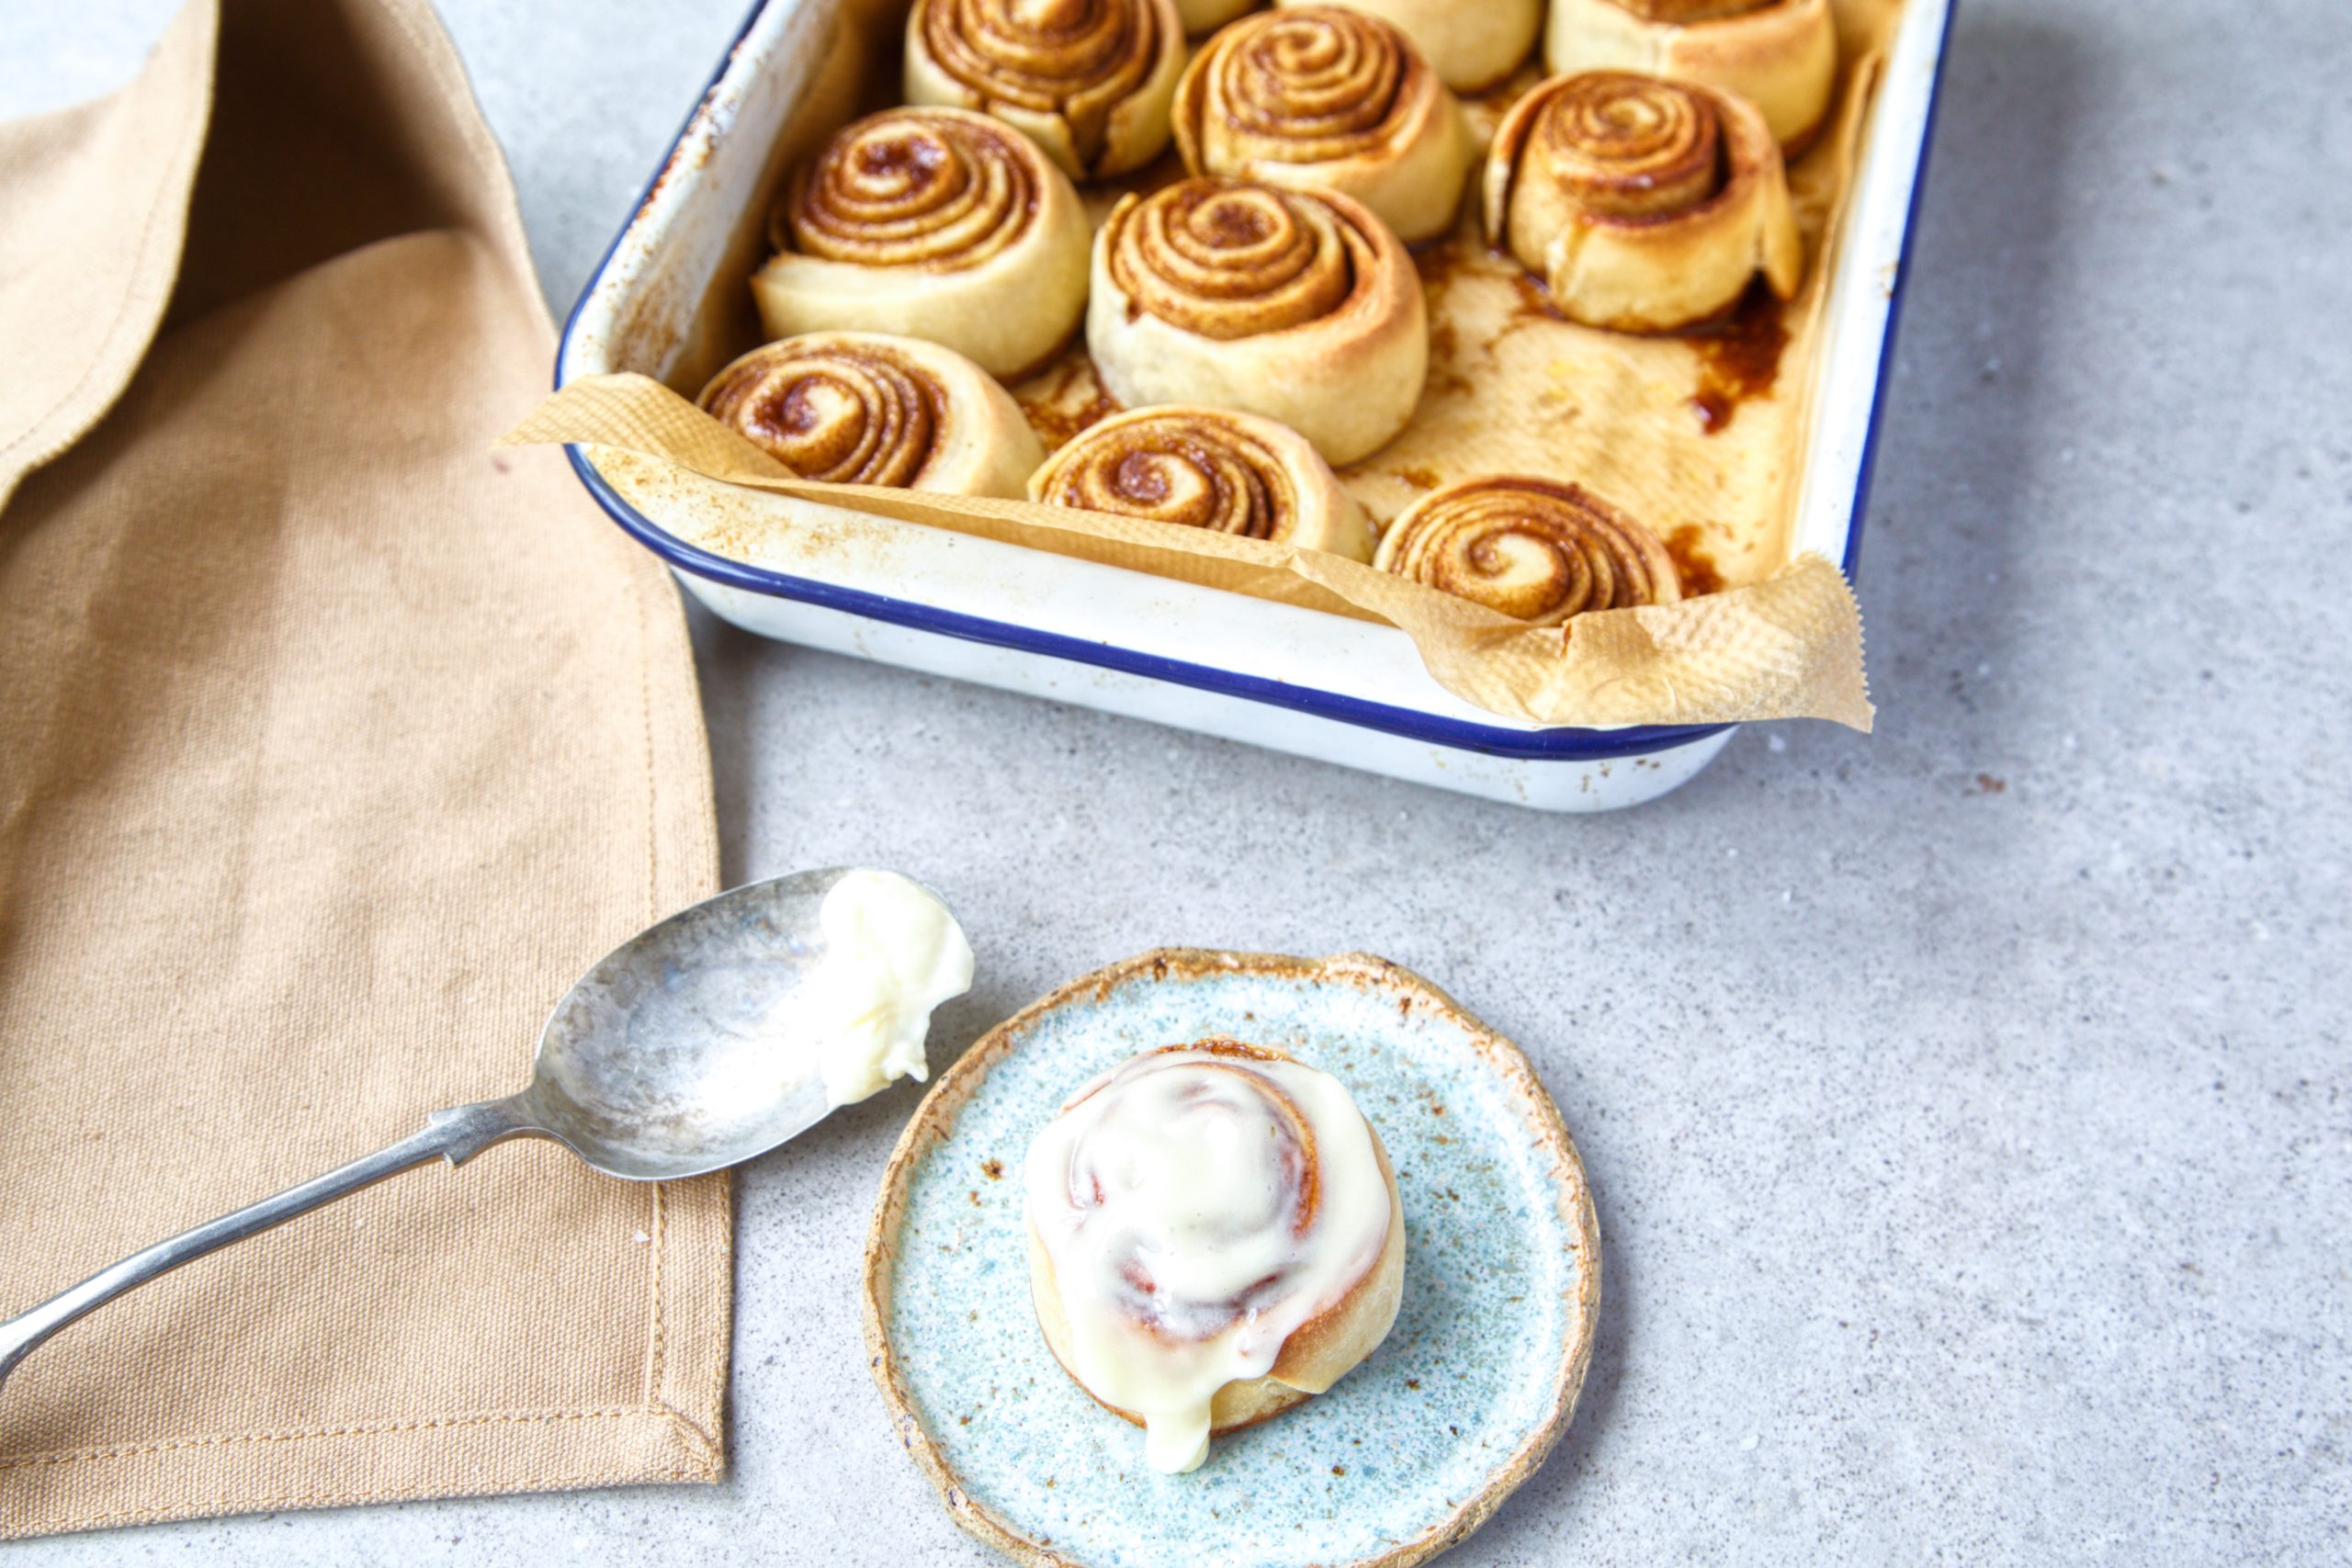 Cinnamon Roll with Icing